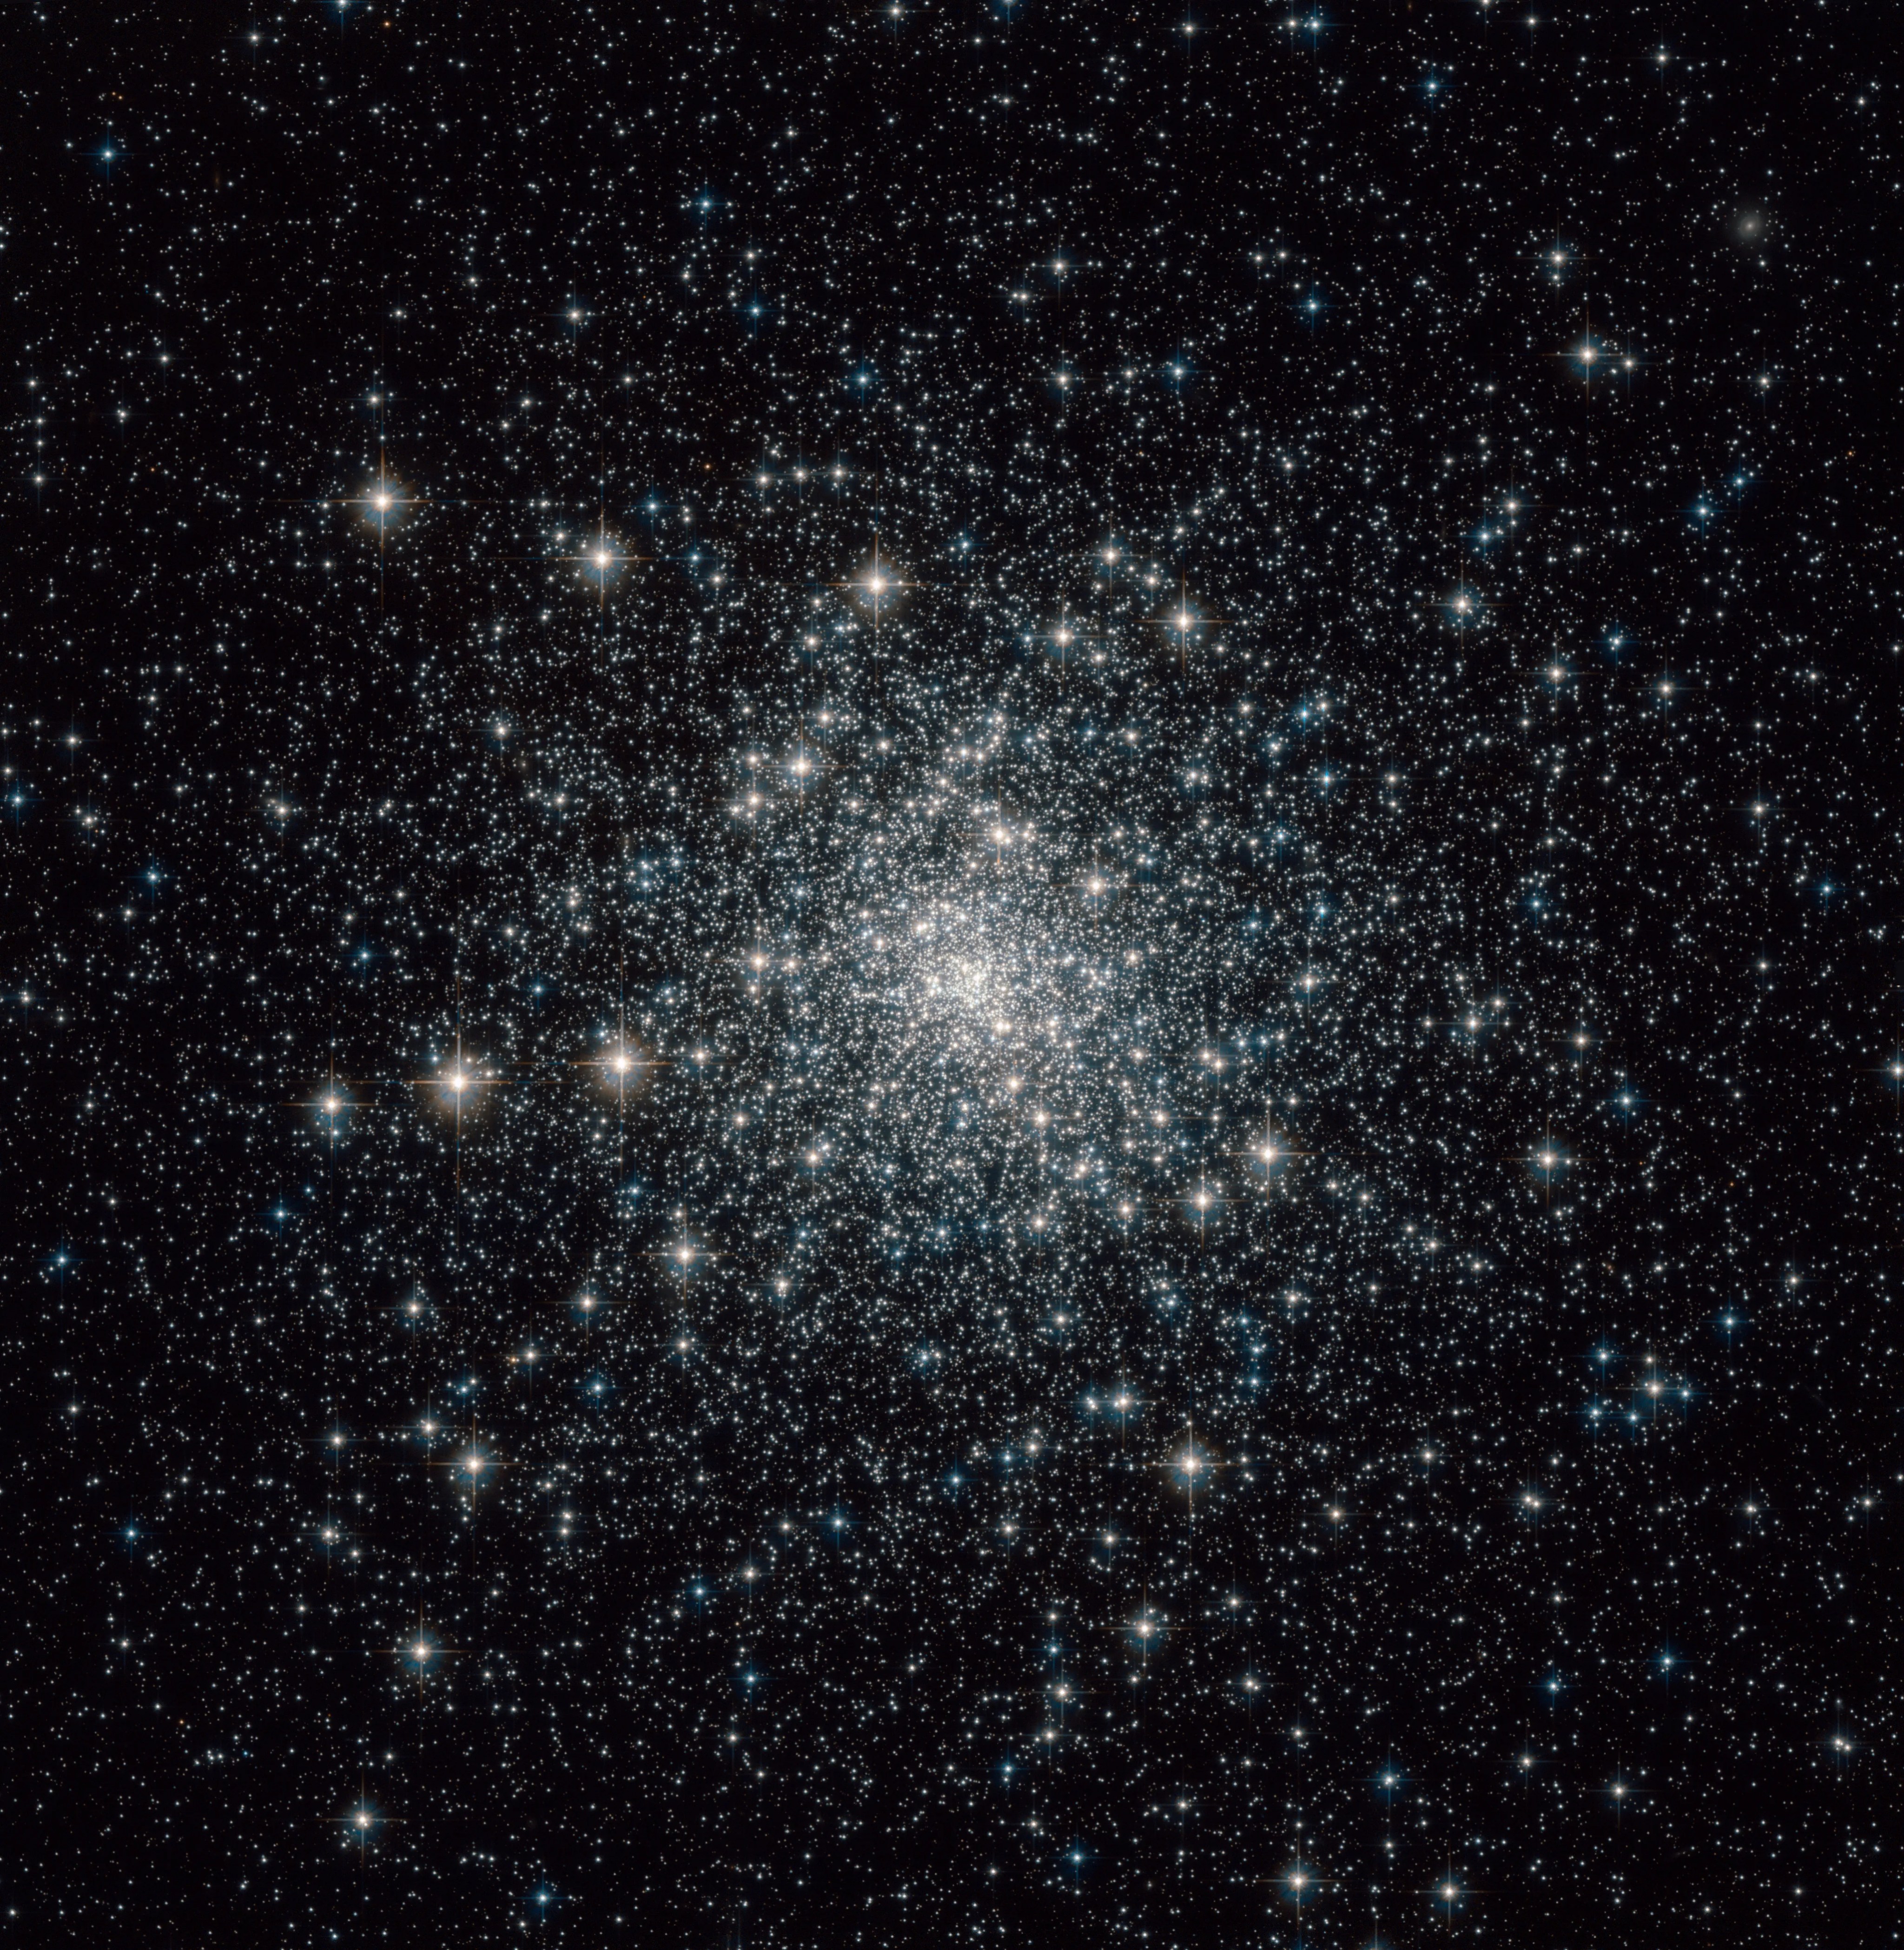 M30 as observed by Hubble